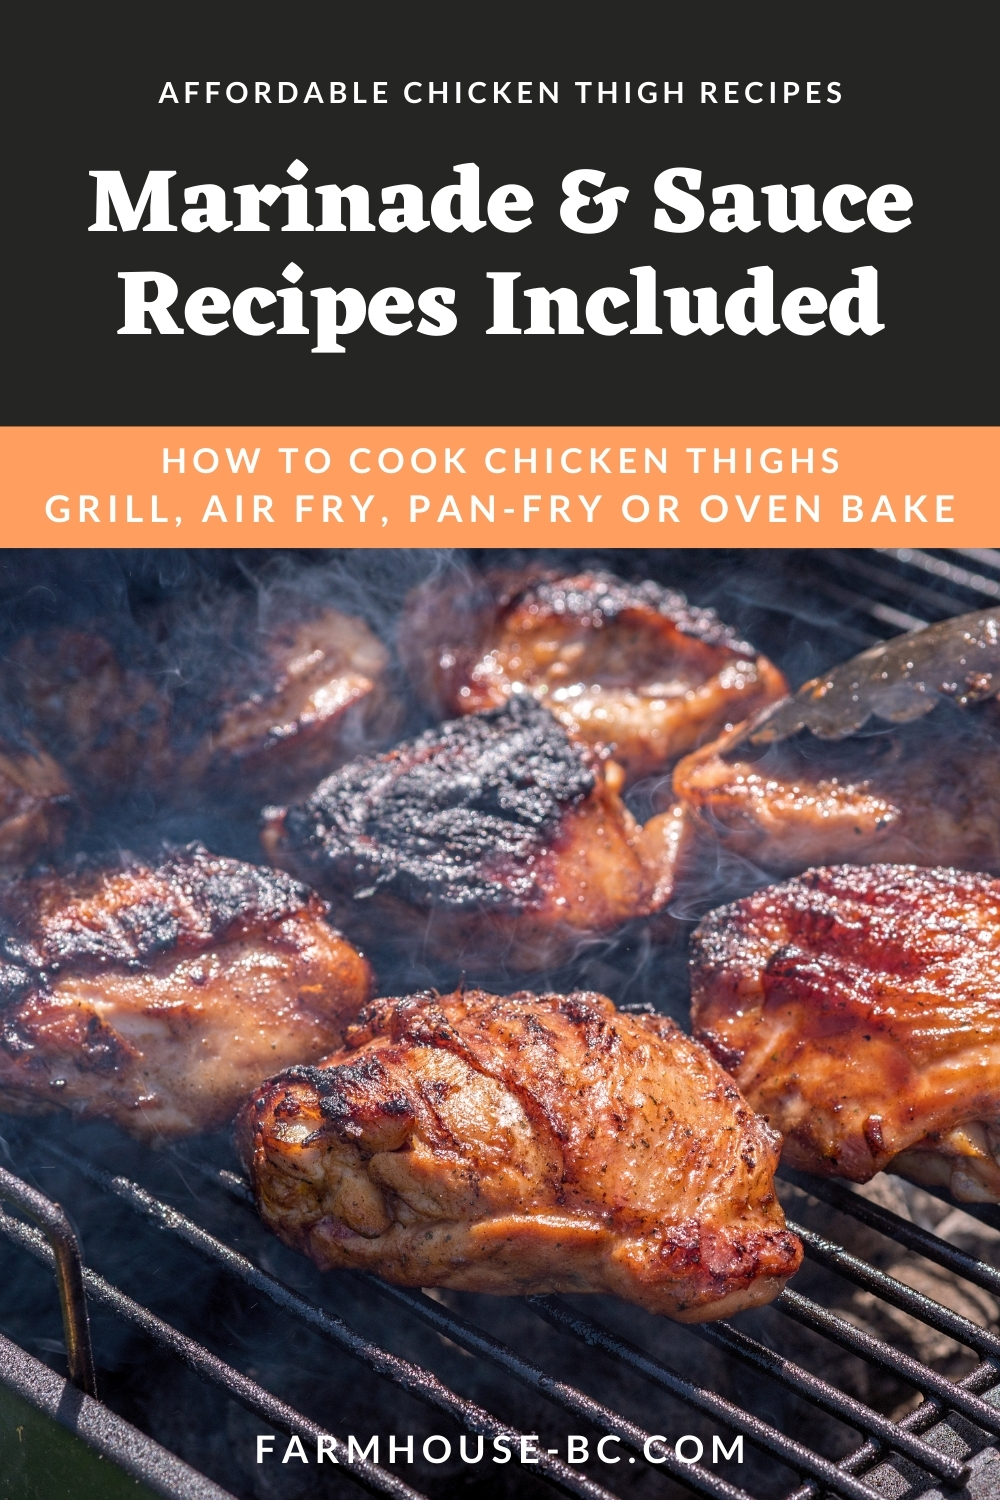 Chicken thigh recipe options for cooking